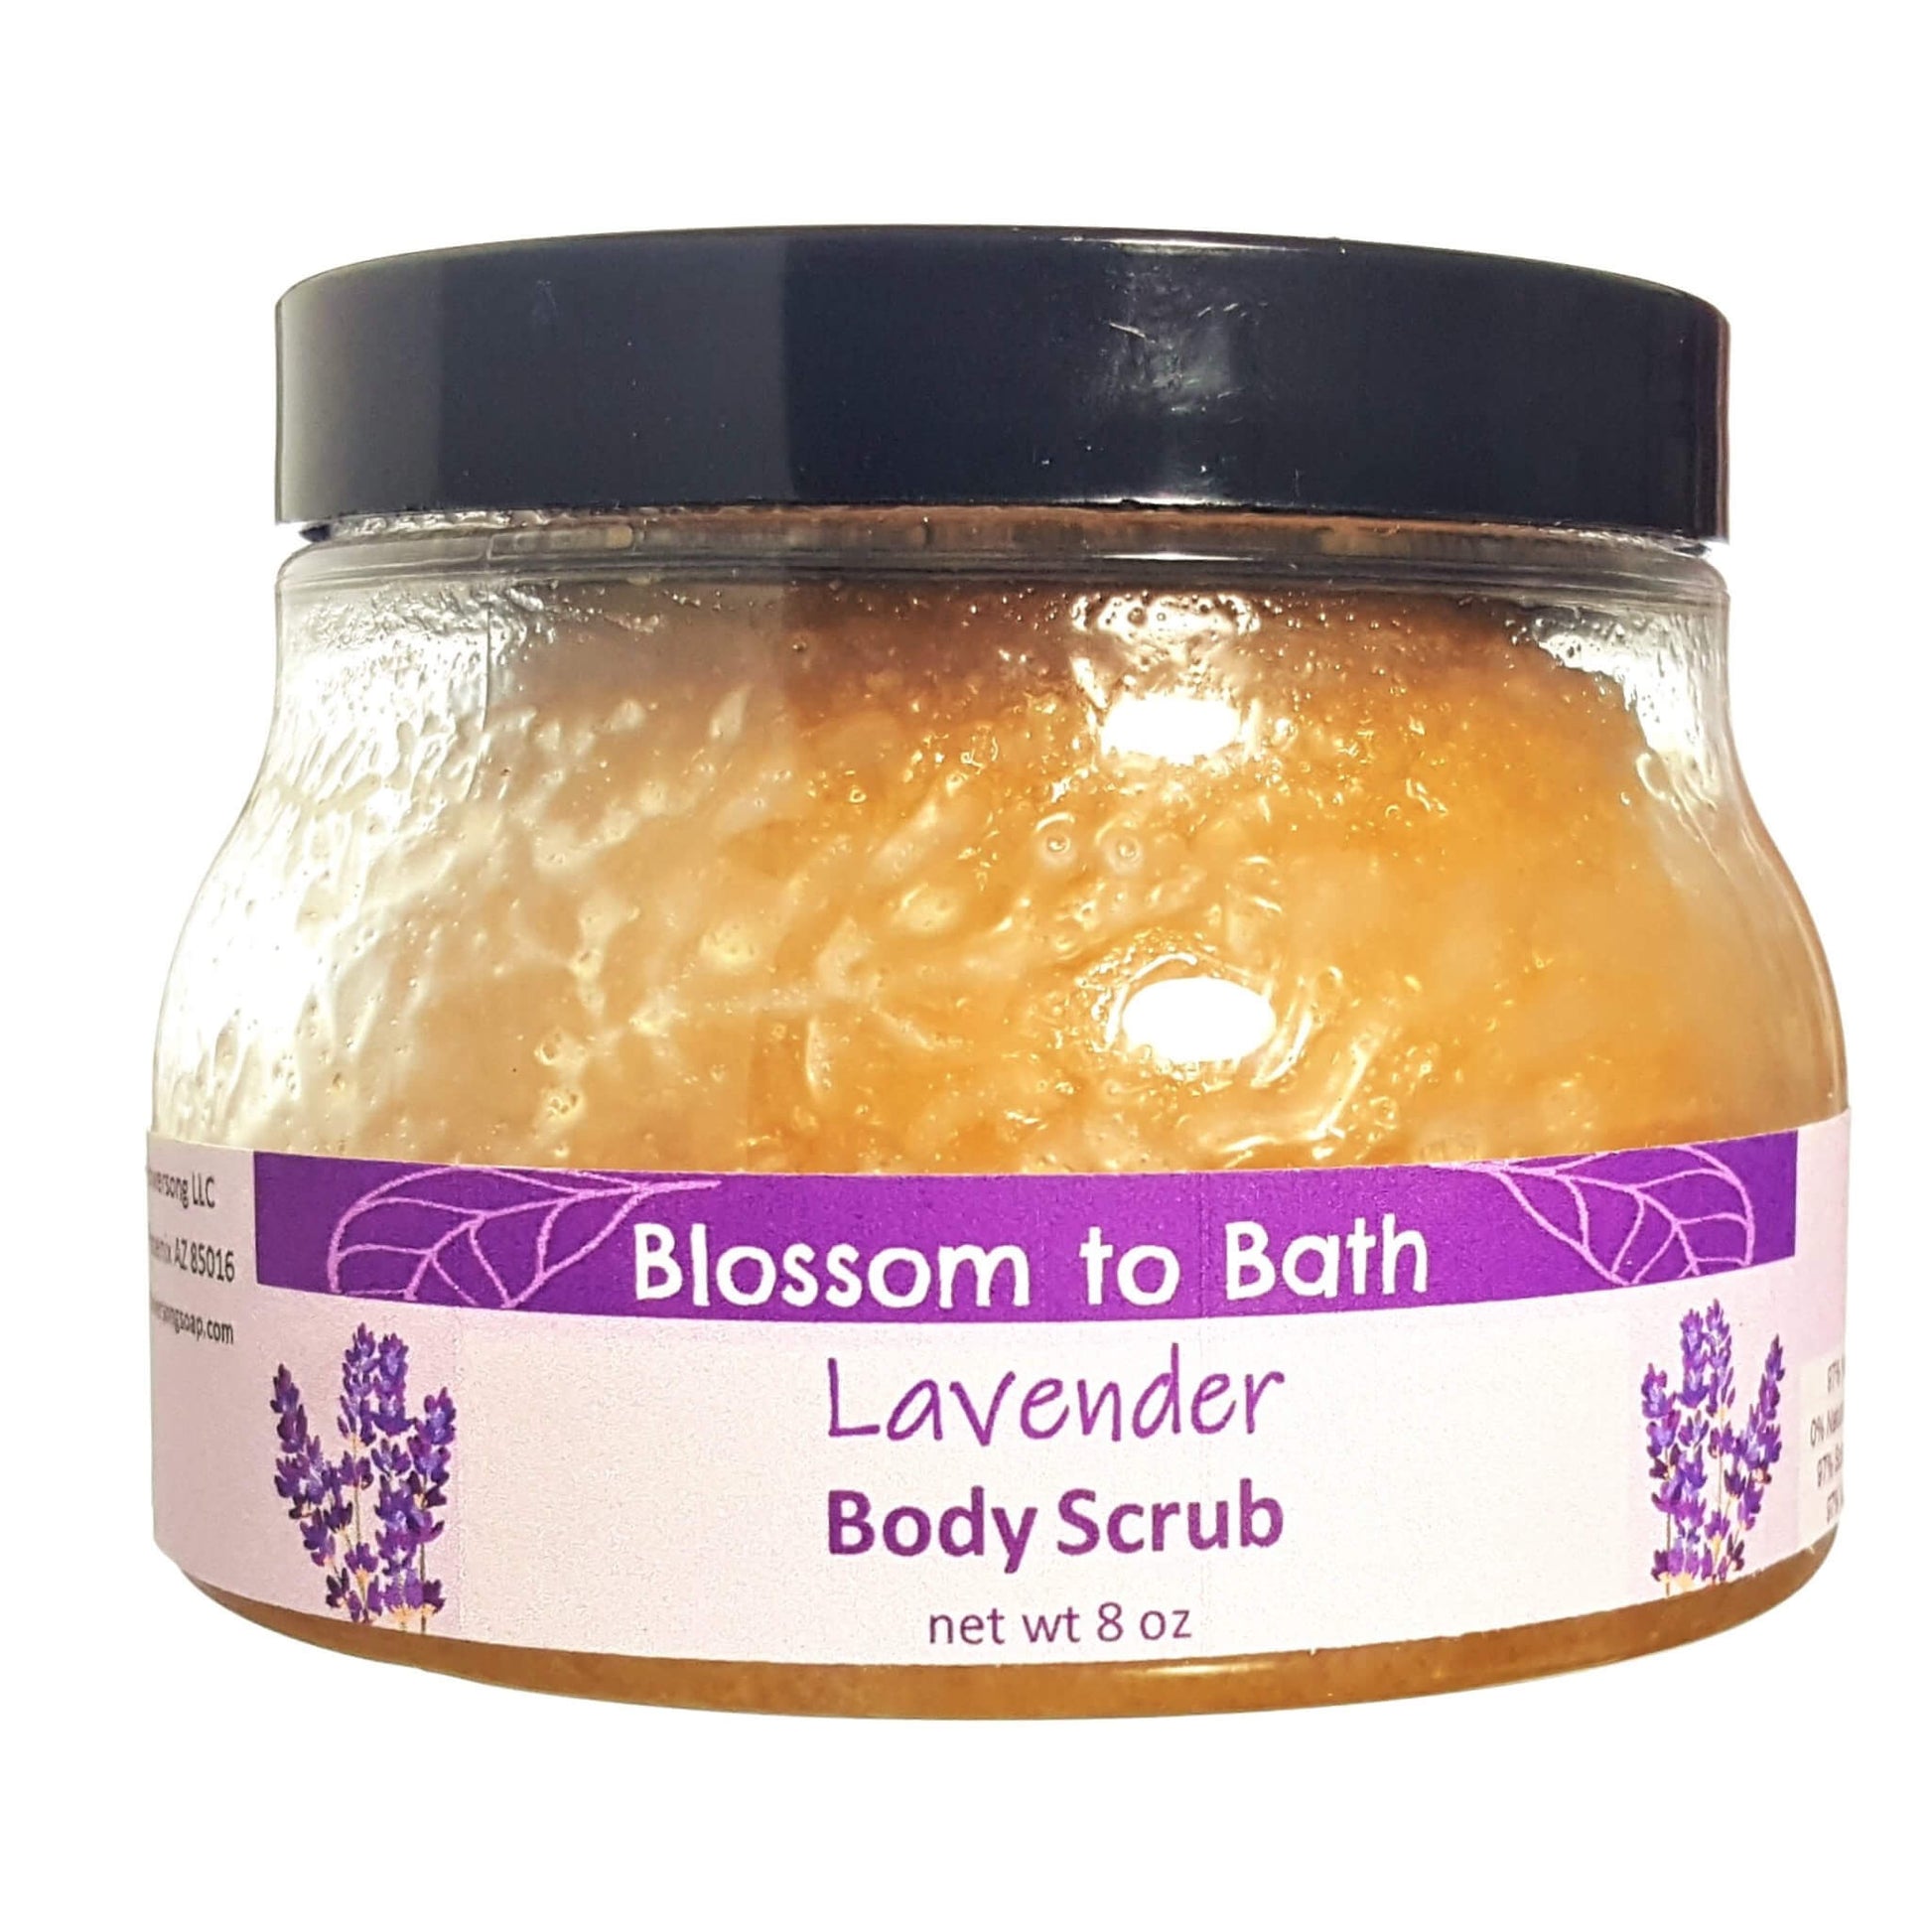 Buy Blossom to Bath Lavender Body Scrub from Flowersong Soap Studio.  Large crystal turbinado sugar plus luxury rich oils conveniently exfoliate and moisturize in one step  Classic lavender scent that is relaxing and comforting.